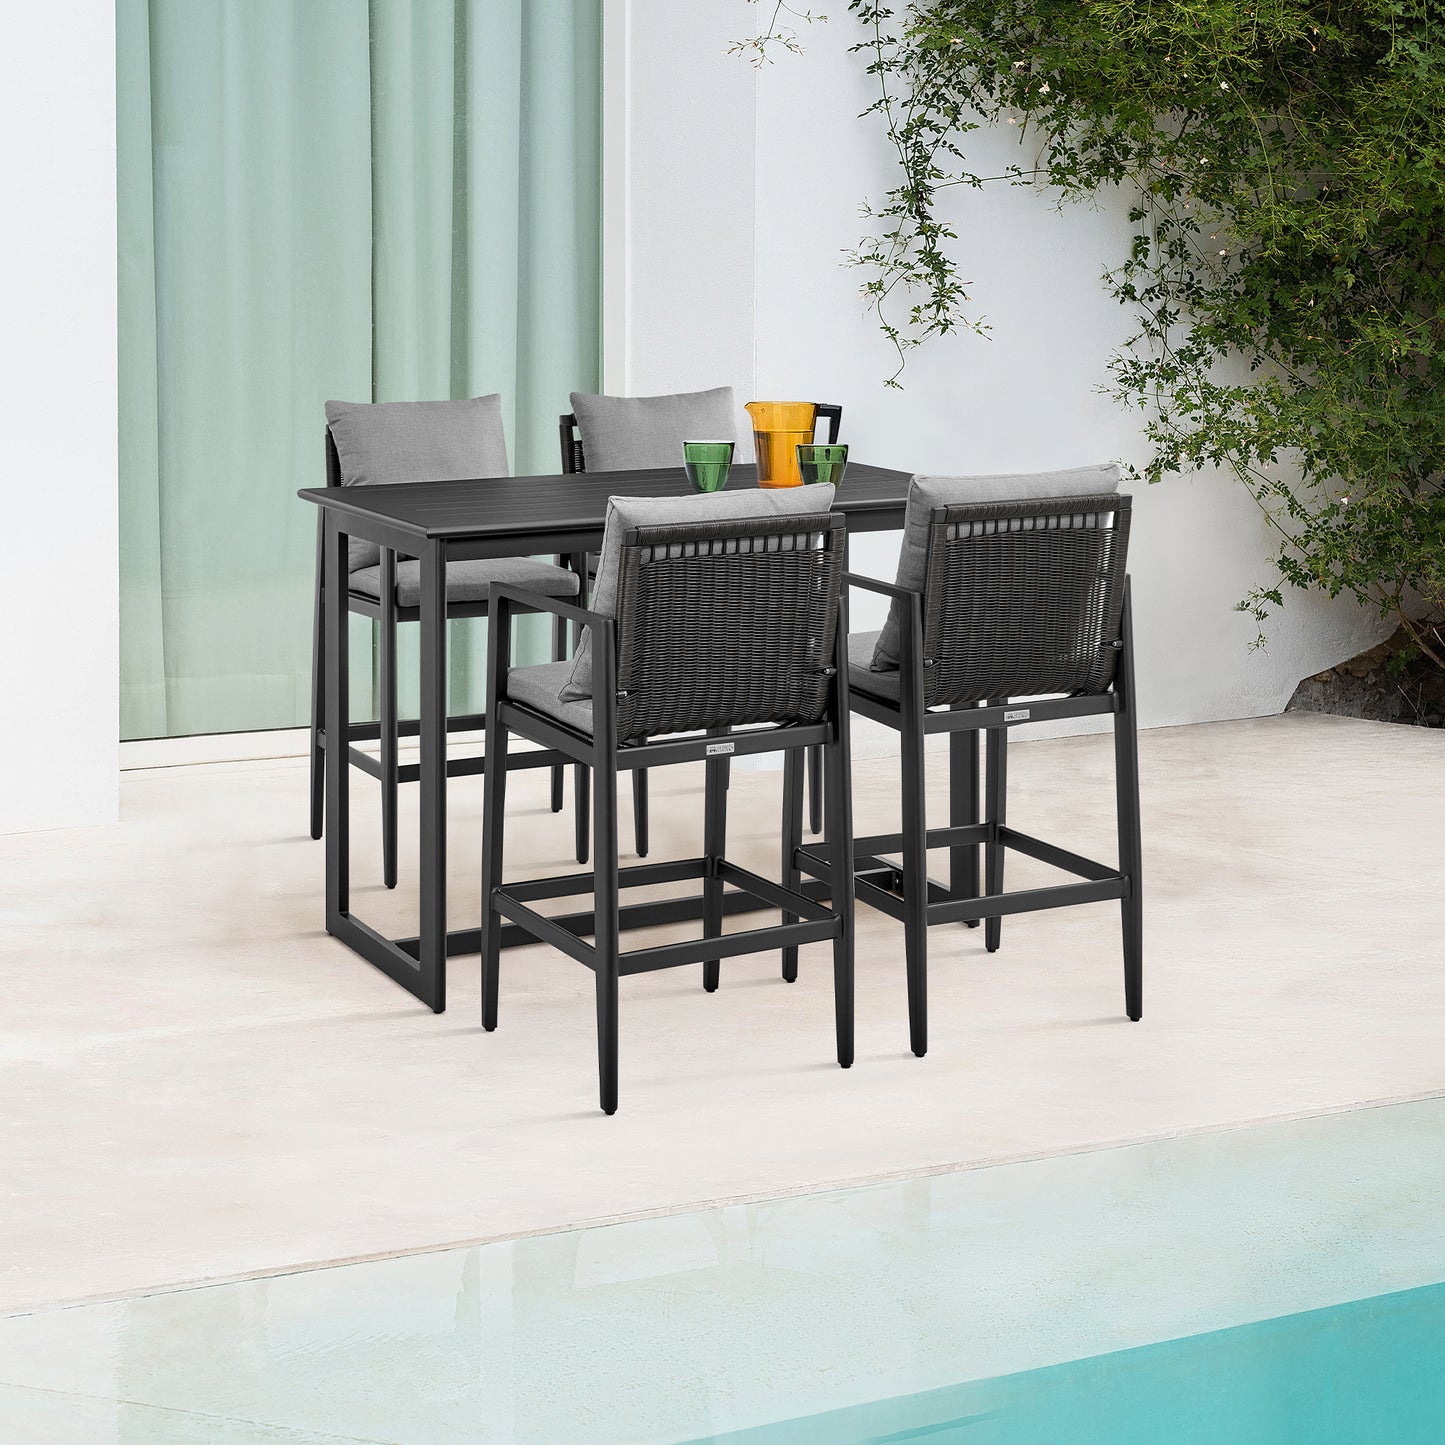 Cayman Outdoor Patio 5-Piece Bar Table Set in Aluminum with Gray Cushions